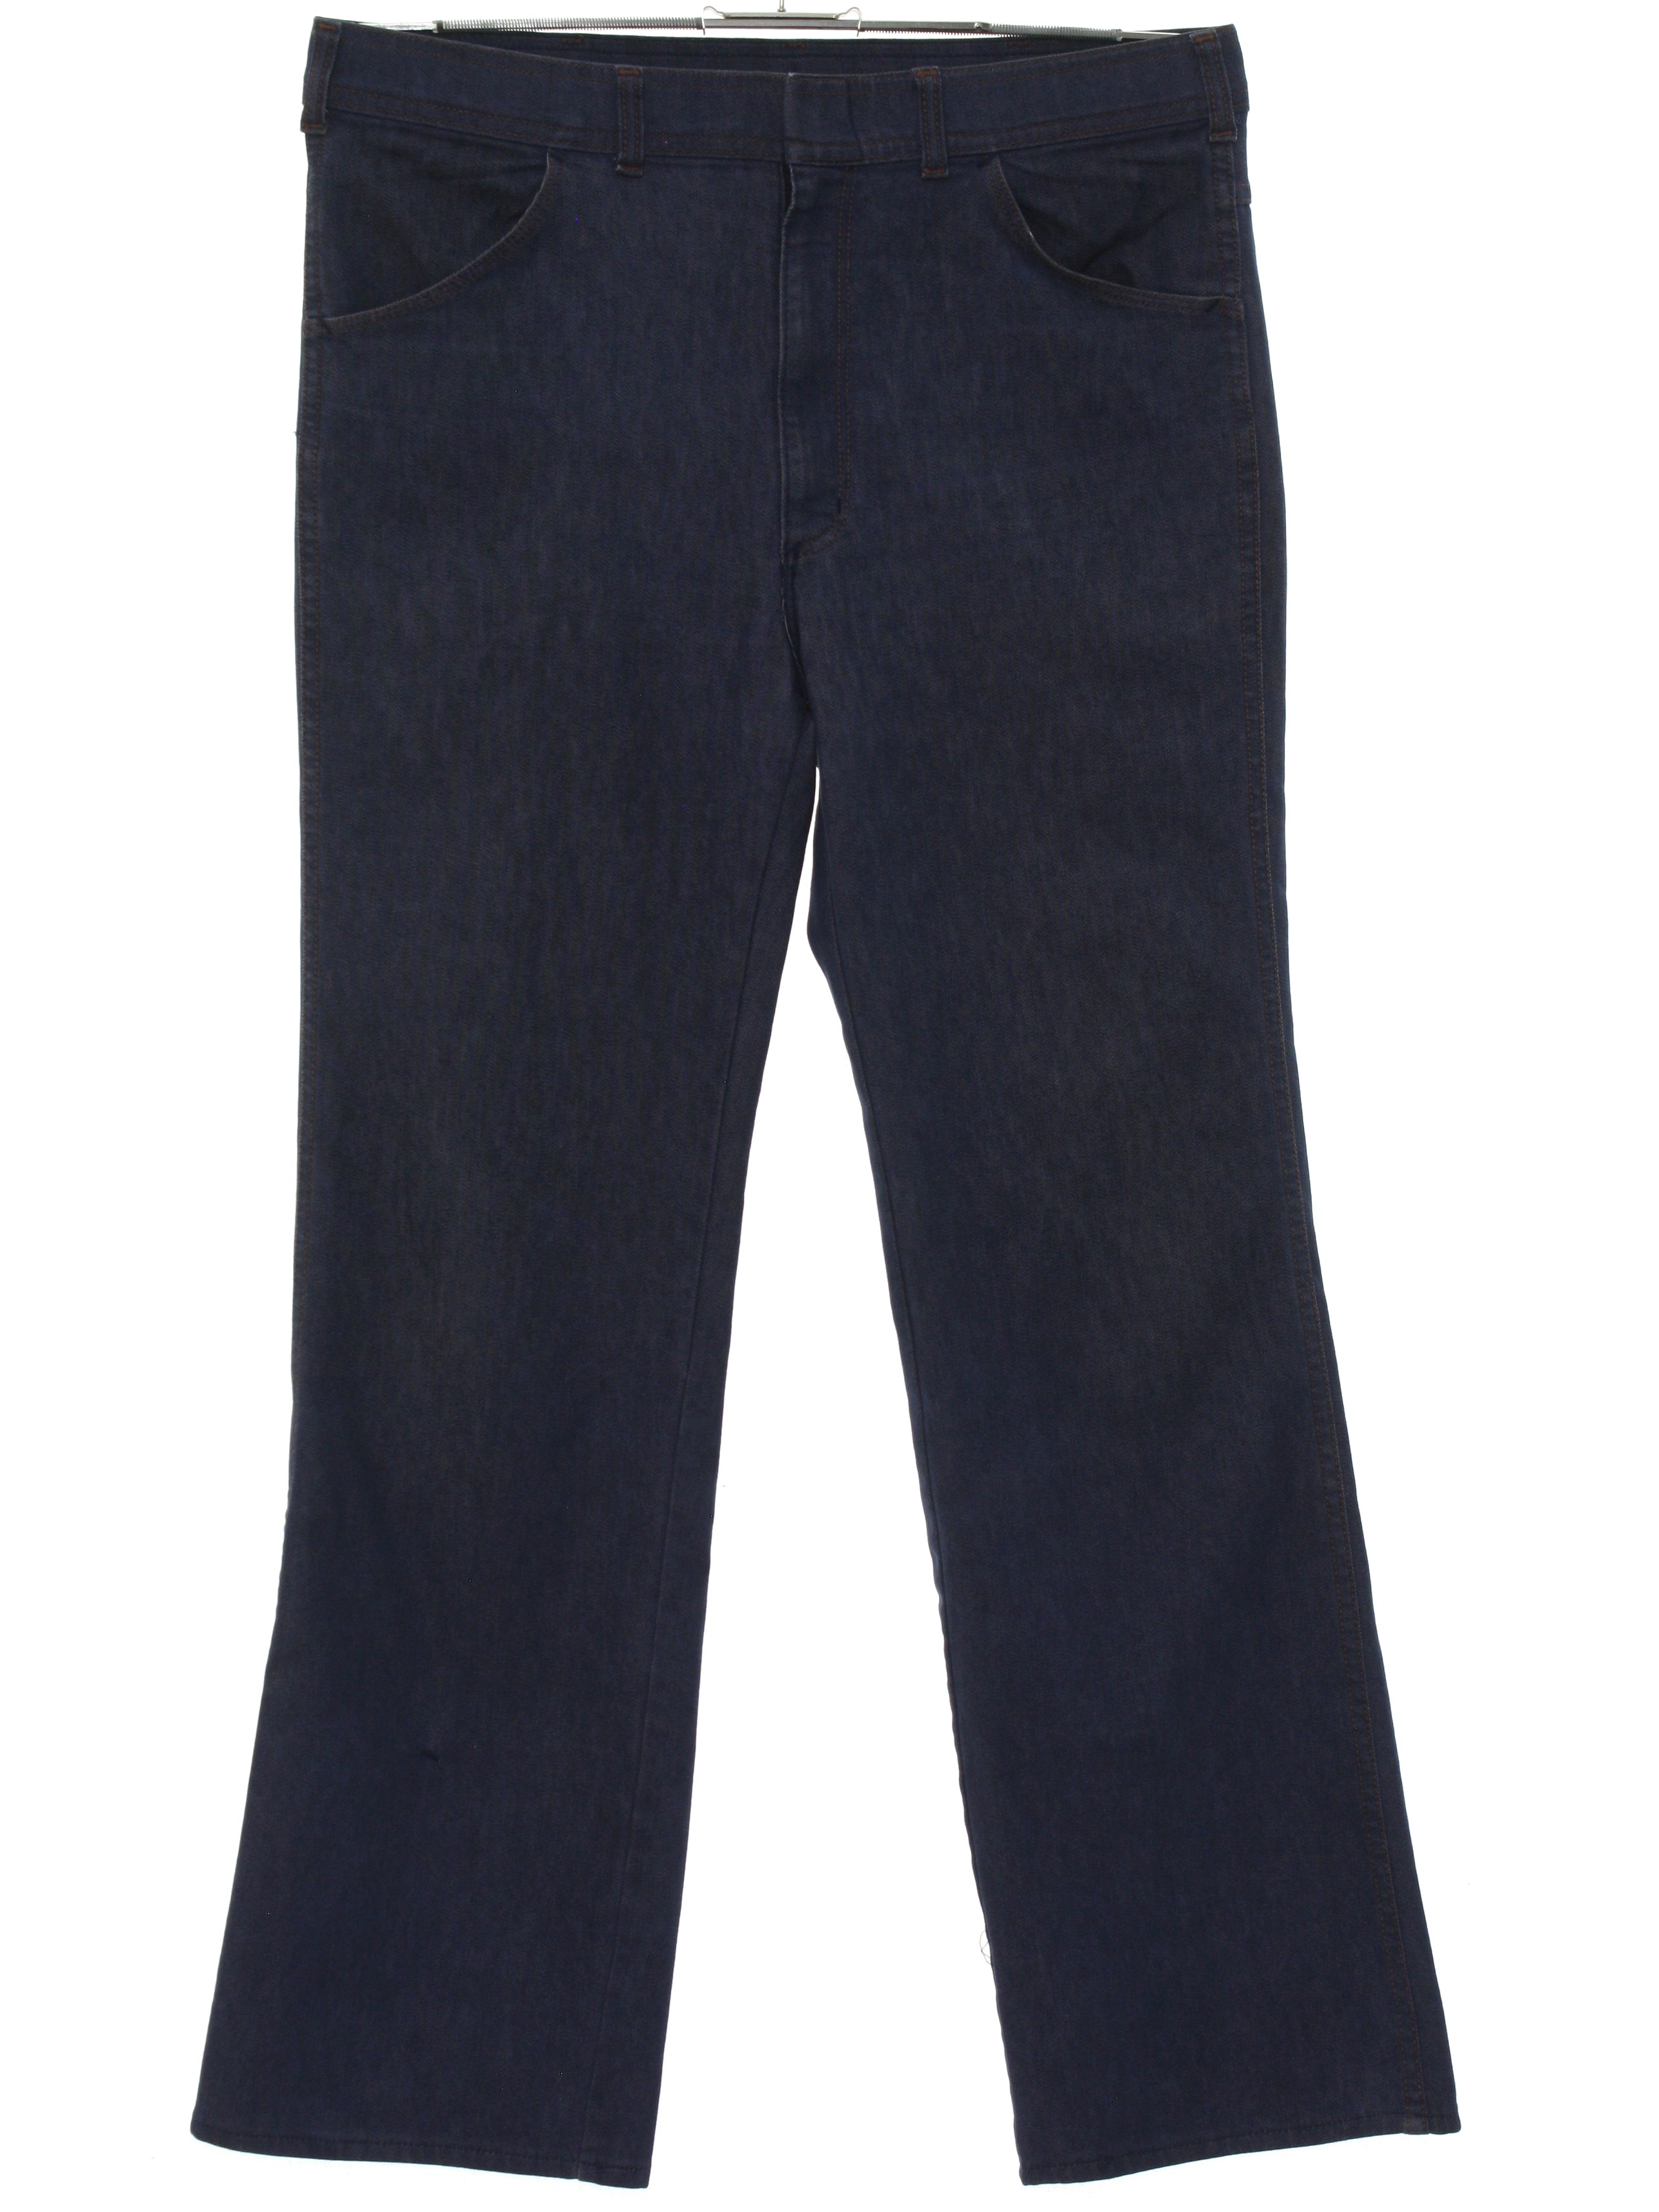 Seventies Vintage Flared Pants / Flares: Late 70s -Sportabouts- Mens ...